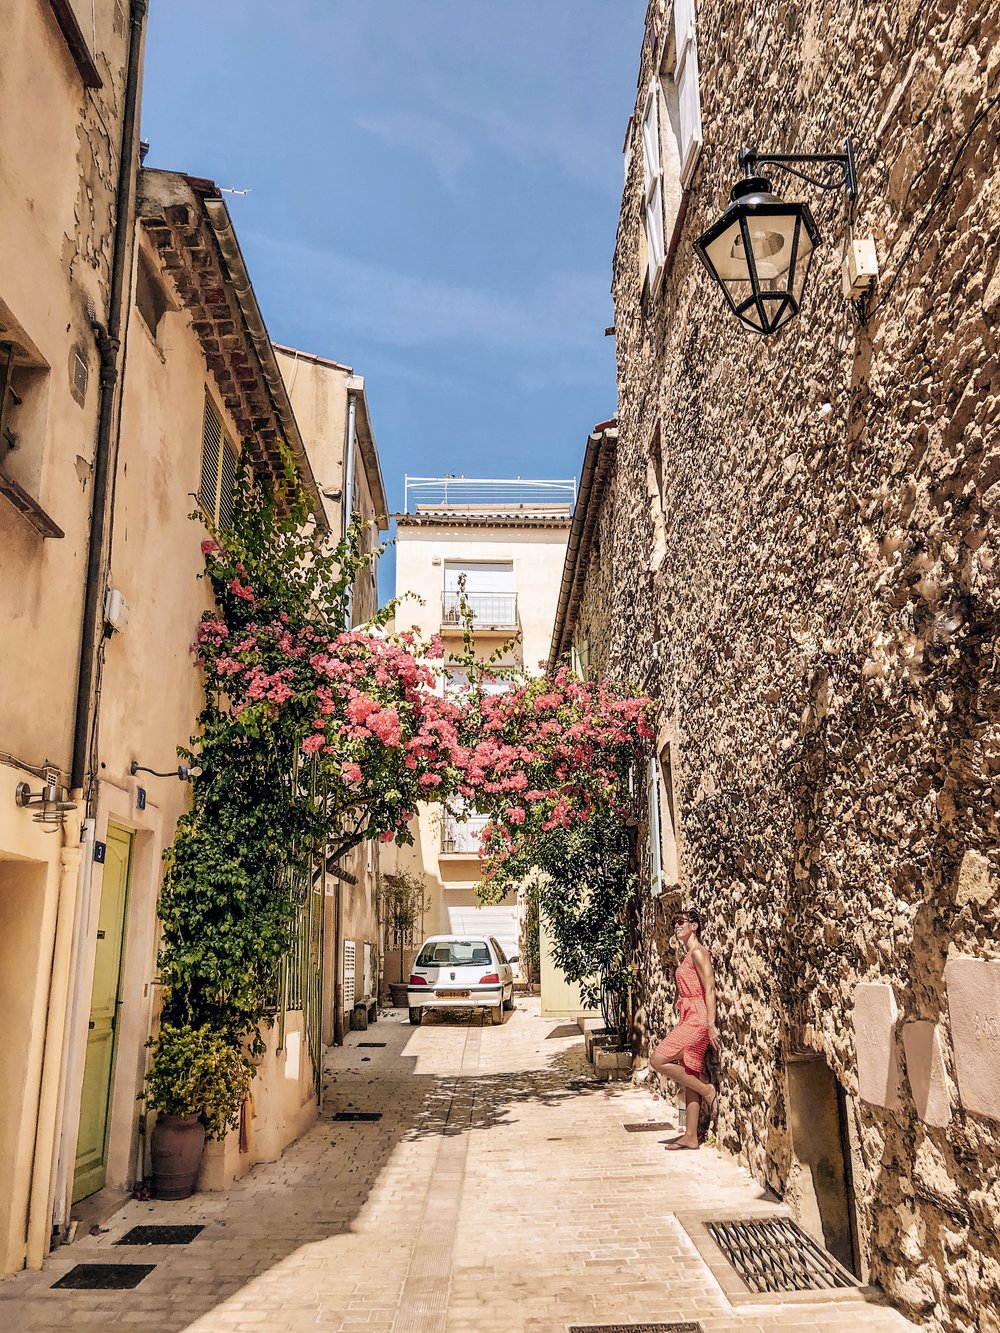 Things to do in Saint-Tropez